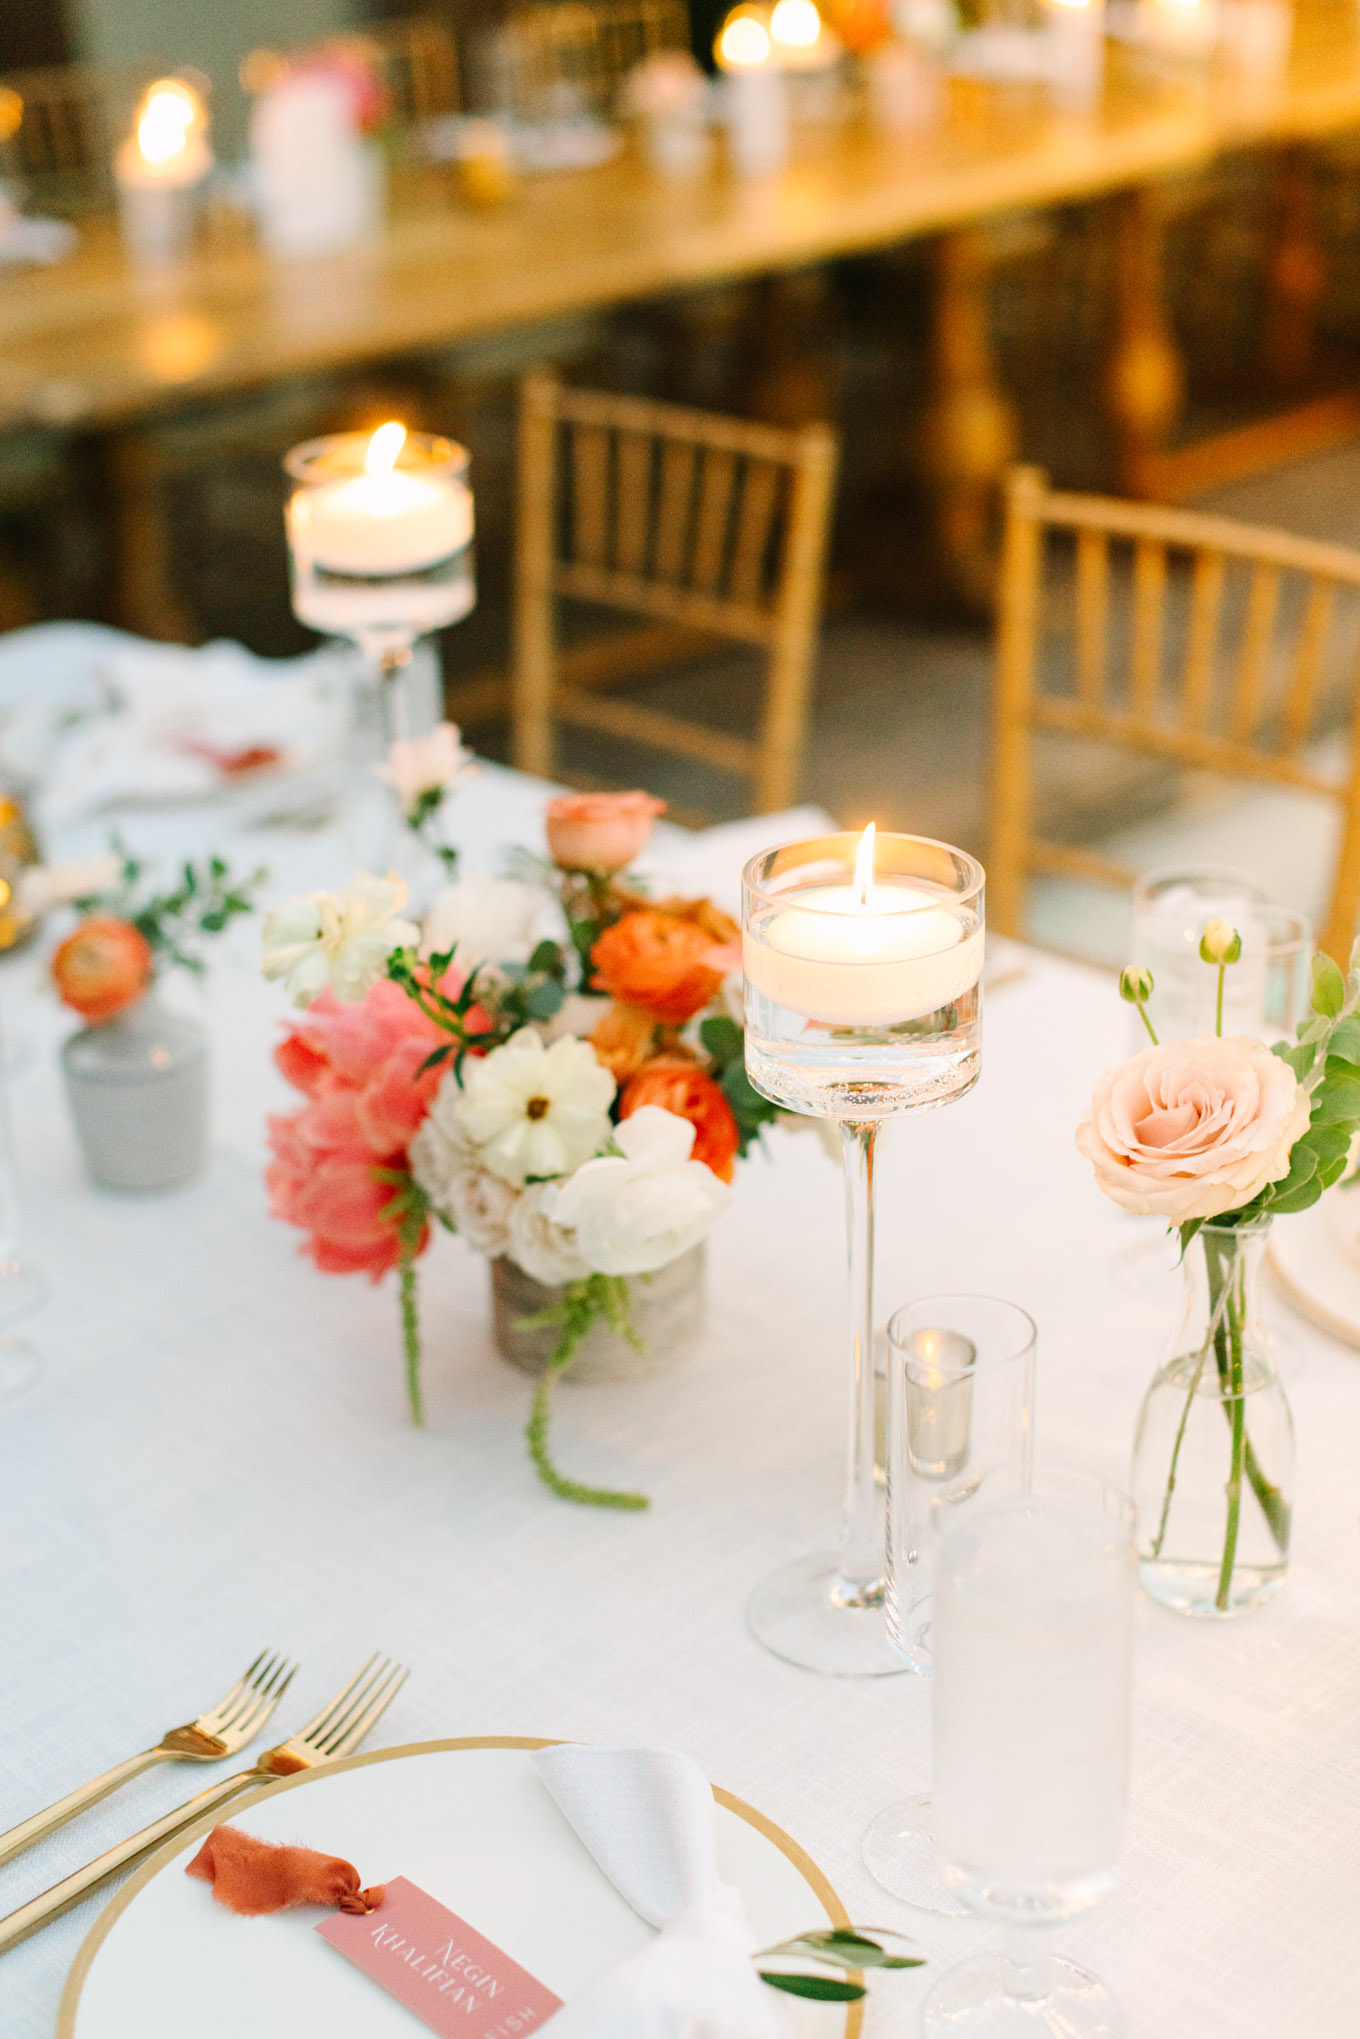 Tabletop decorations | Pink Bougainvillea Estate wedding | Colorful LA wedding photography | #bougainvilleaestate #palmspringswedding #palmspringsweddingvenue #palmspringsphotographer Source: Mary Costa Photography | Los Angeles